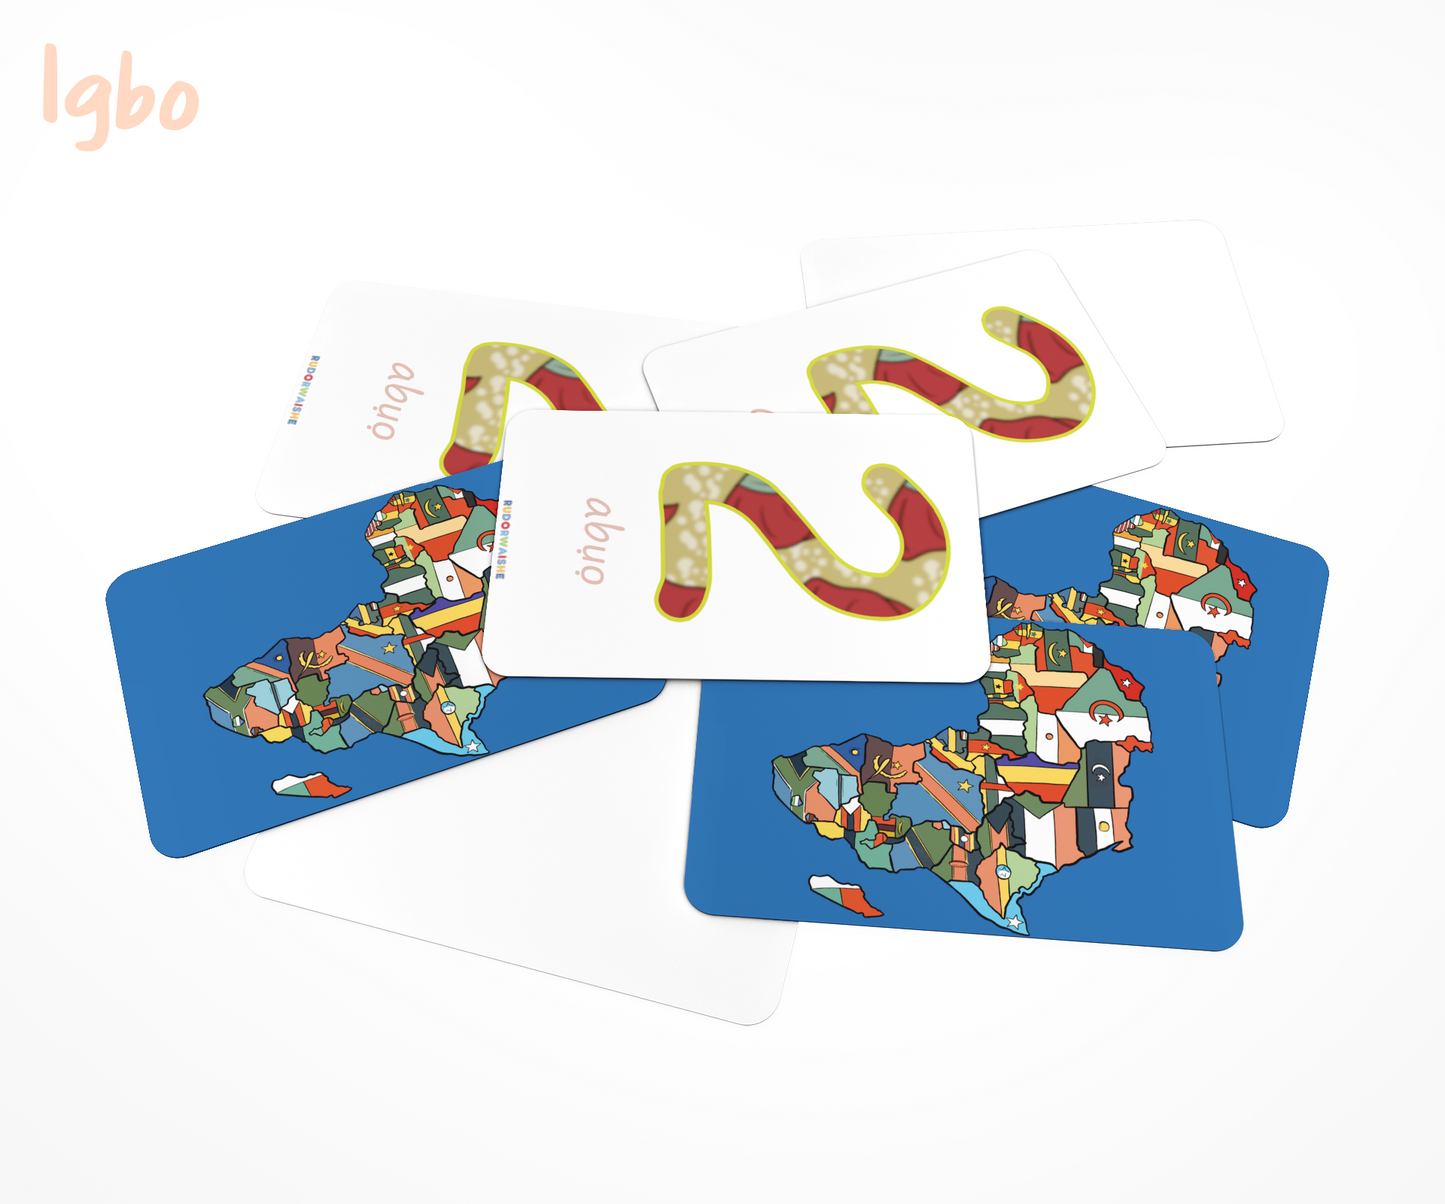 Numbers Flashcards